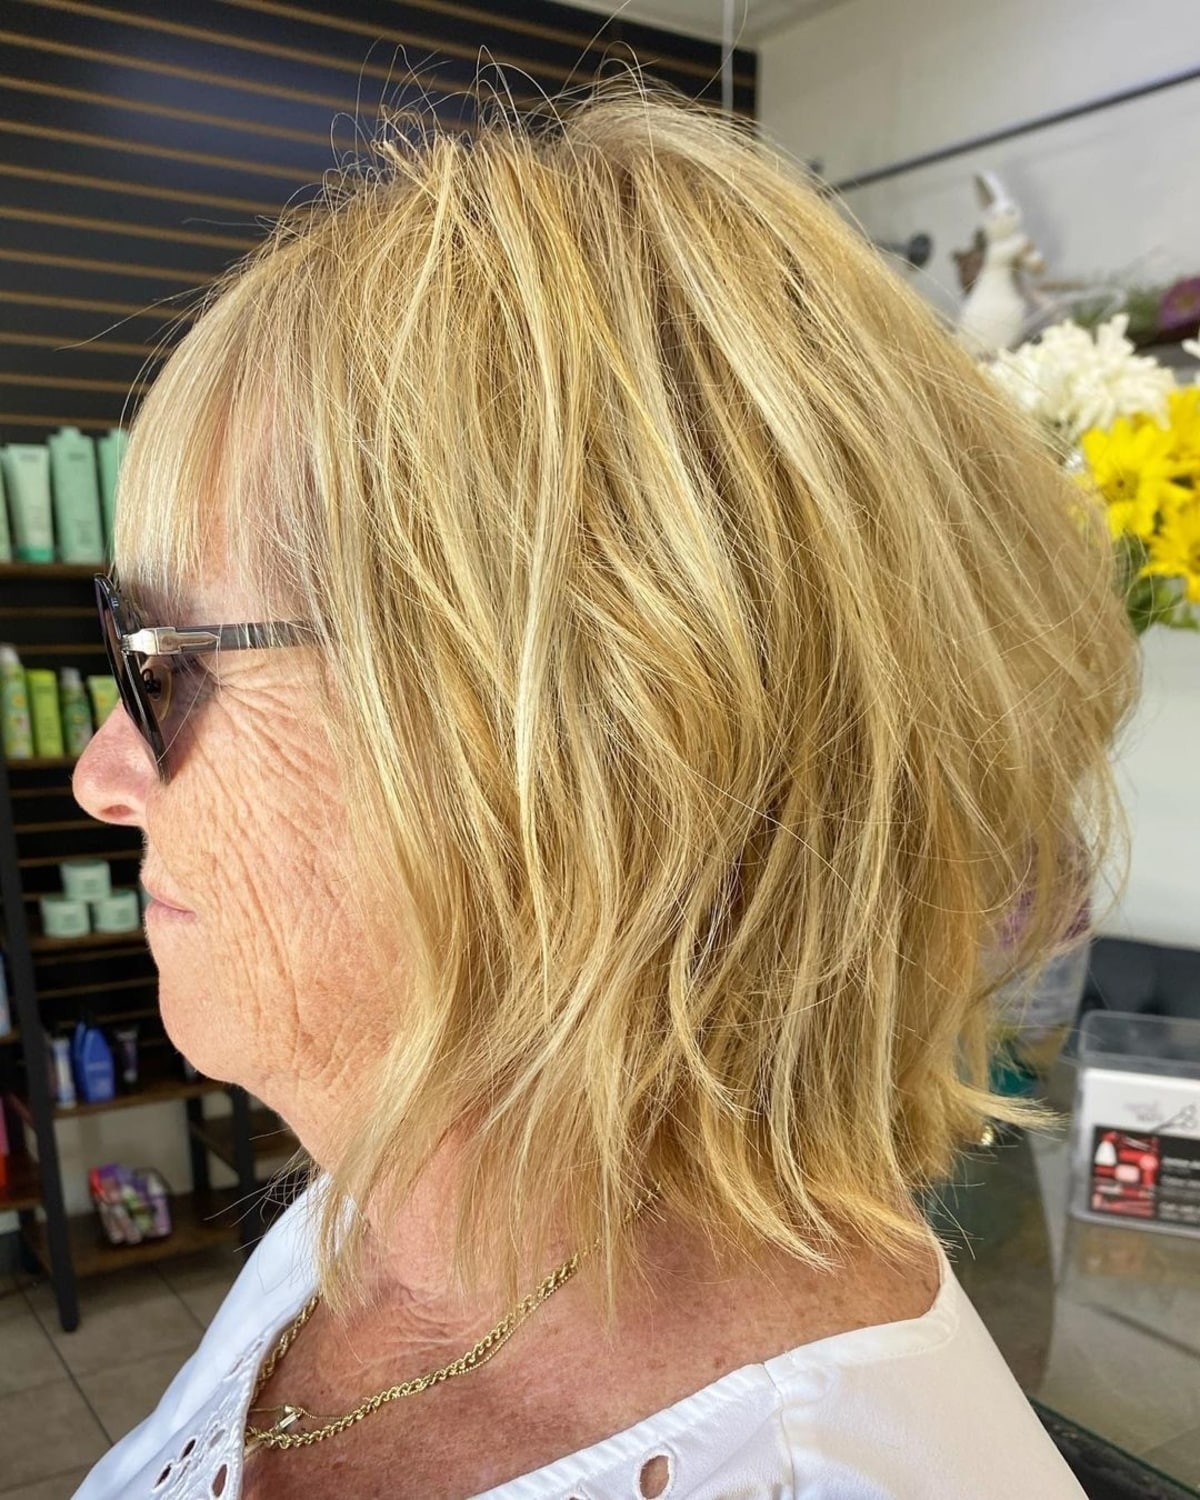 Mature Mid-length bob with layers hairstyle for older women